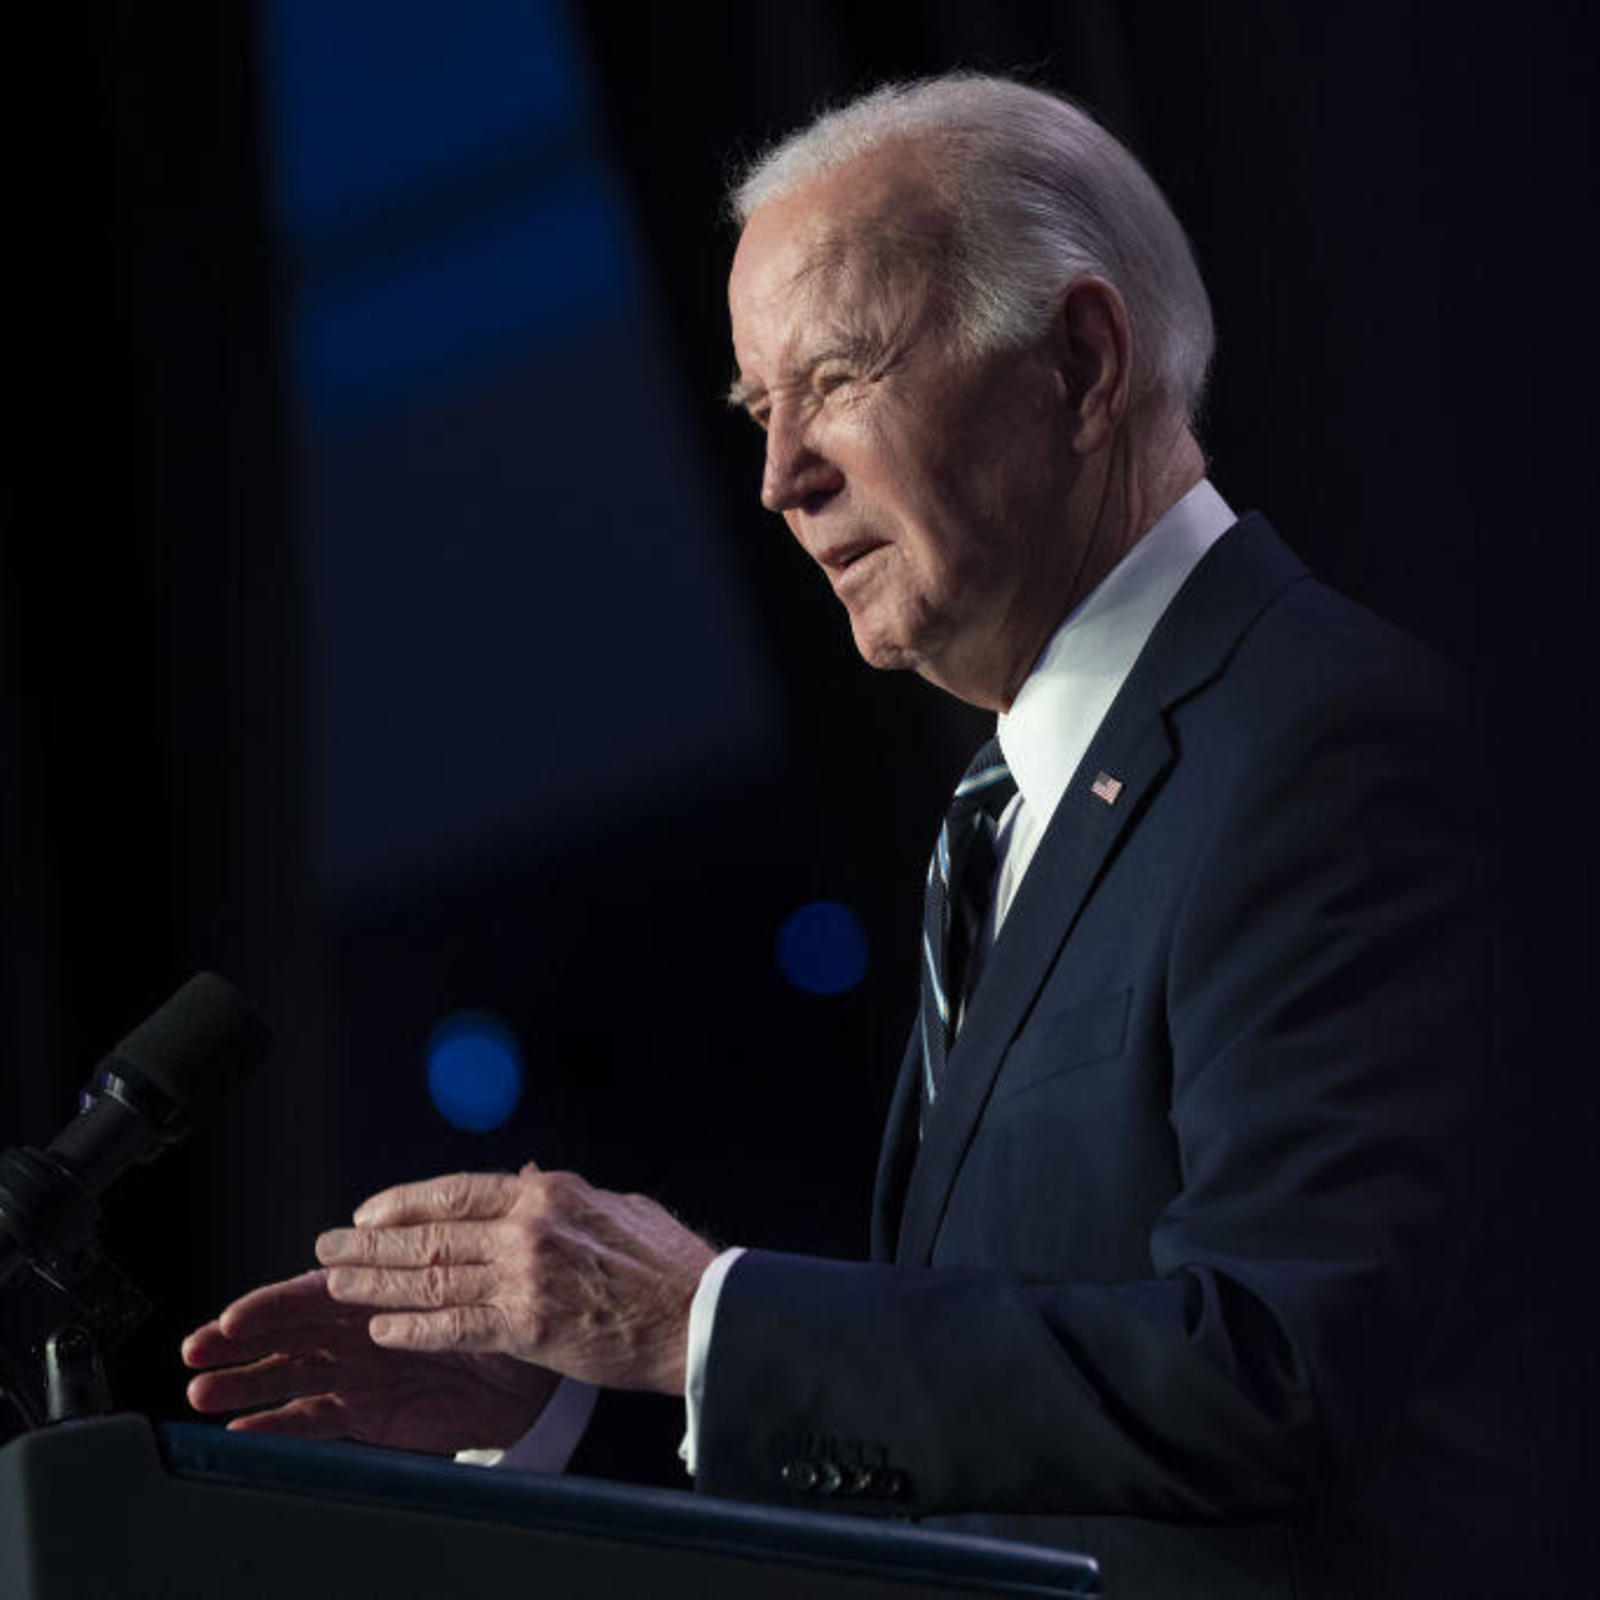 democrats in one philadelphia county say they're unconcerned about biden's age